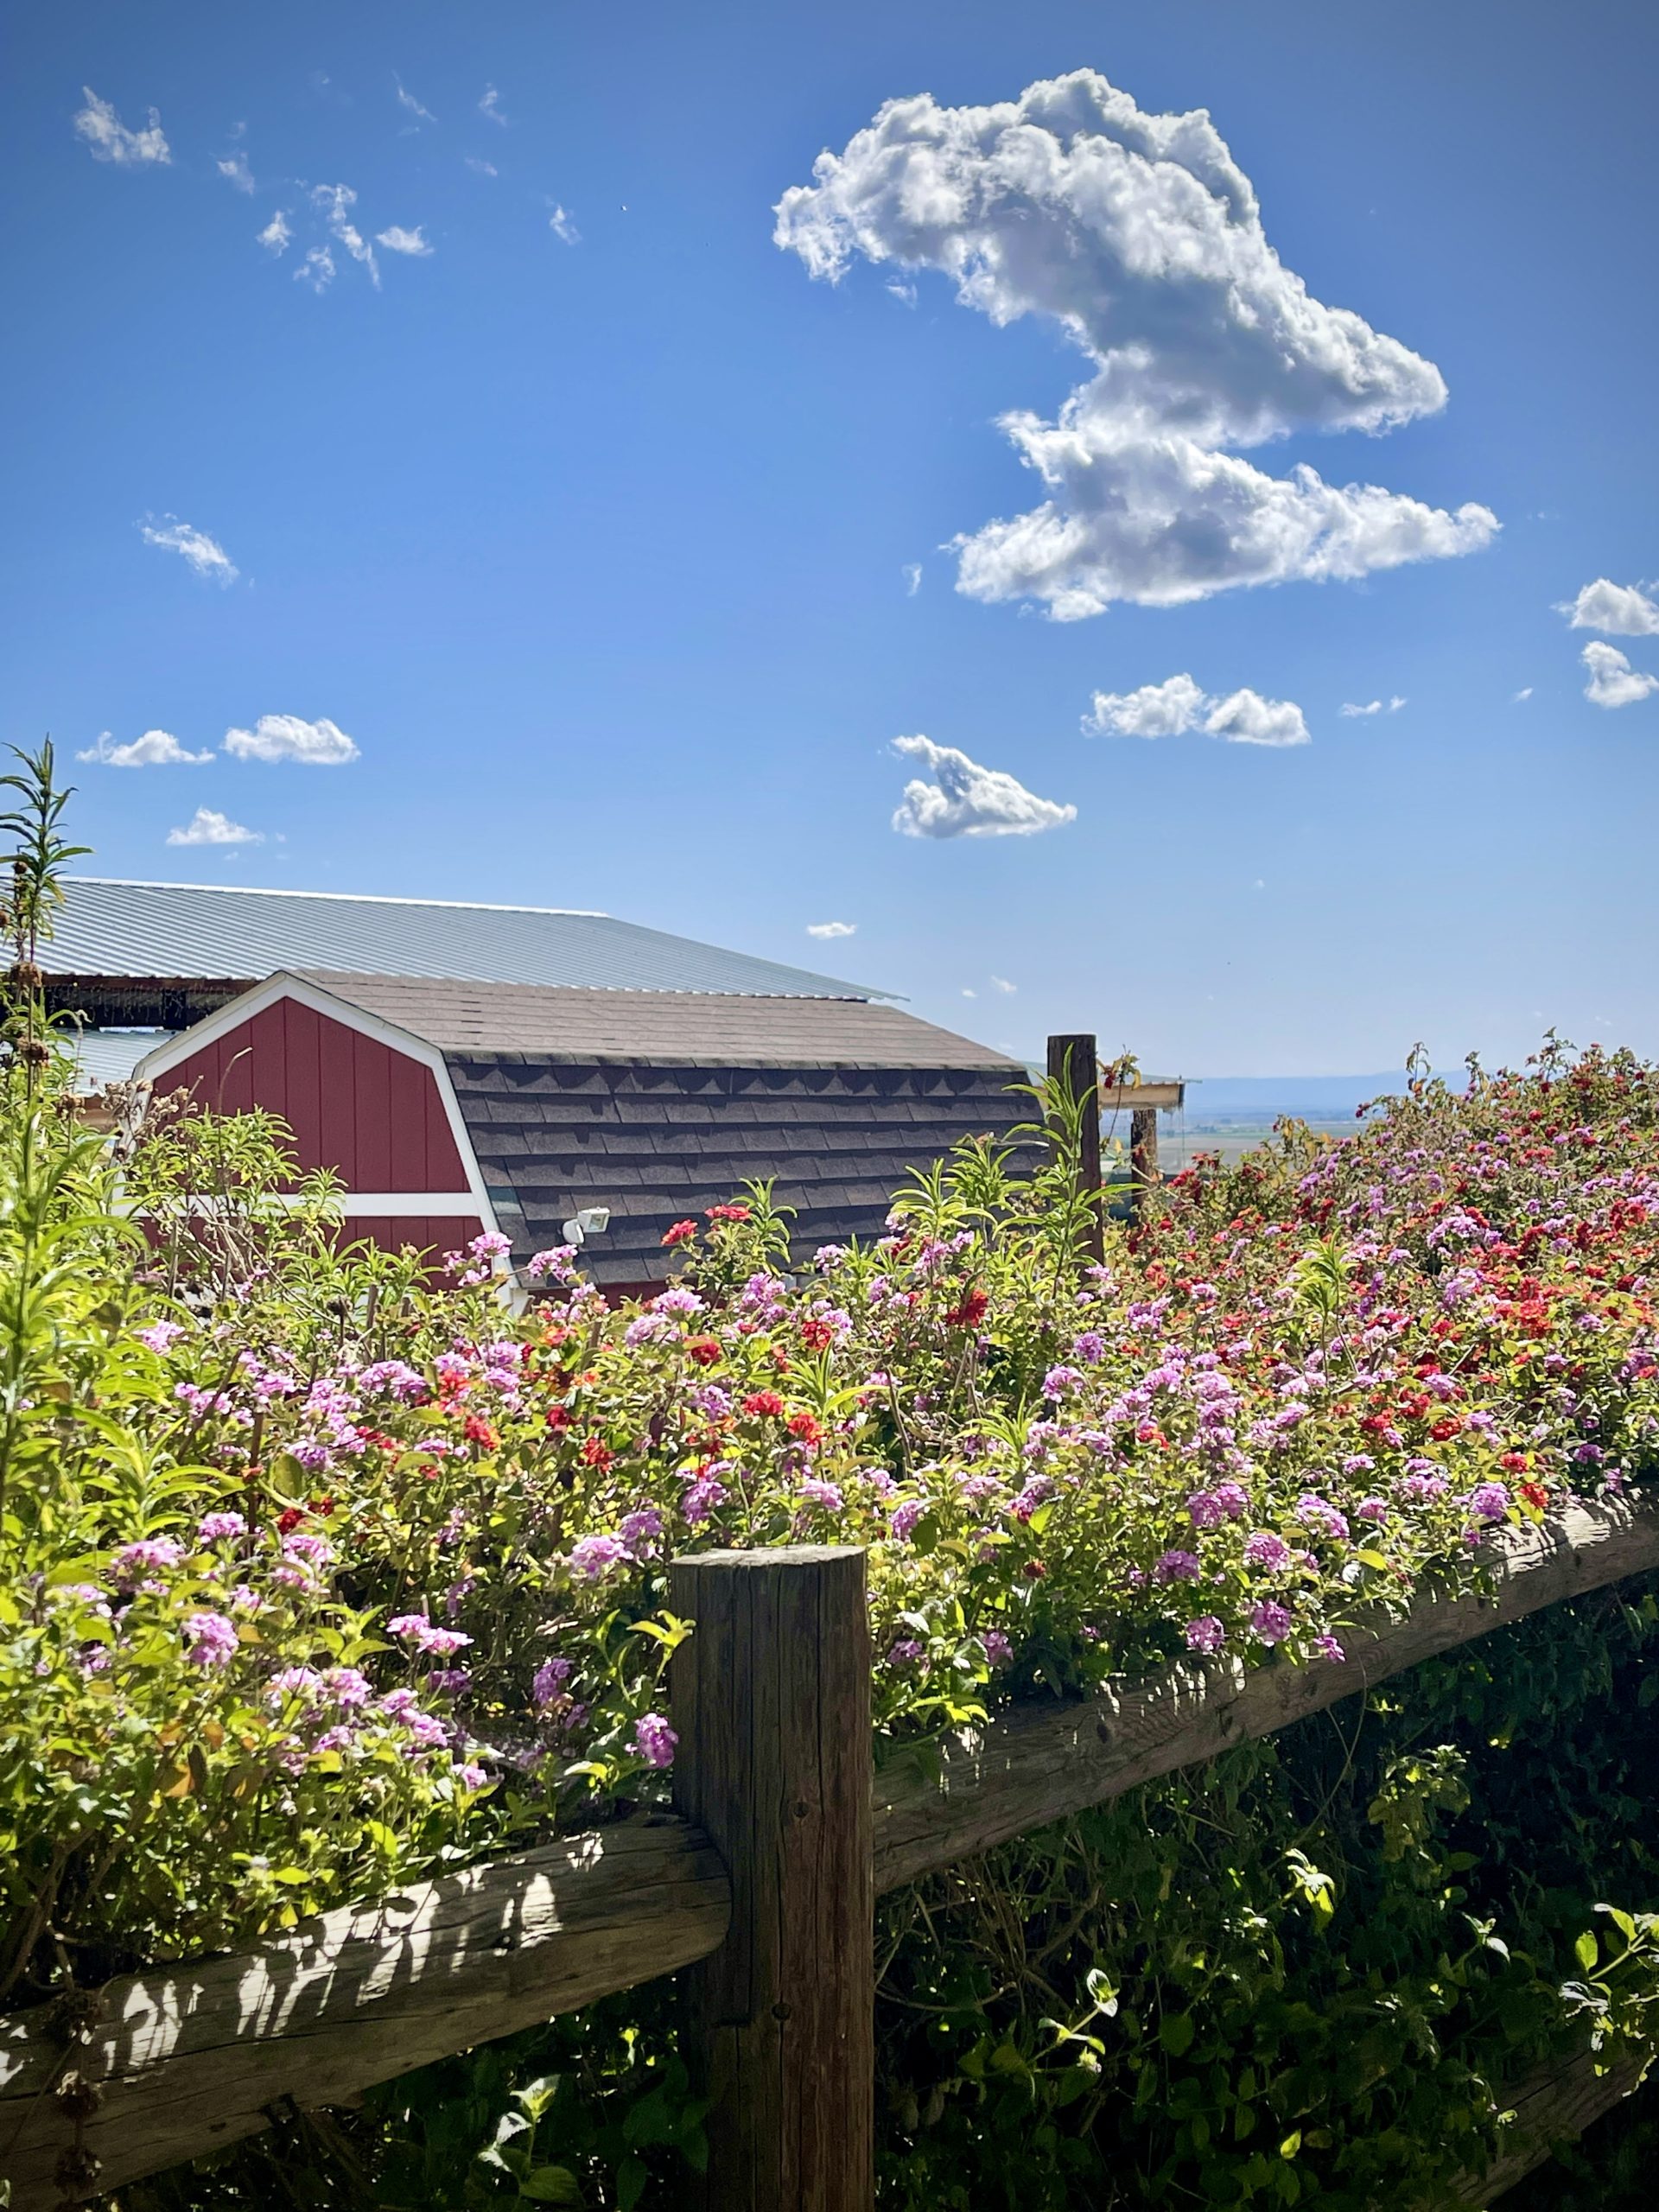 Silver clouds against a blue sky hovering above a red barn roof with wildflowers in the foreground.